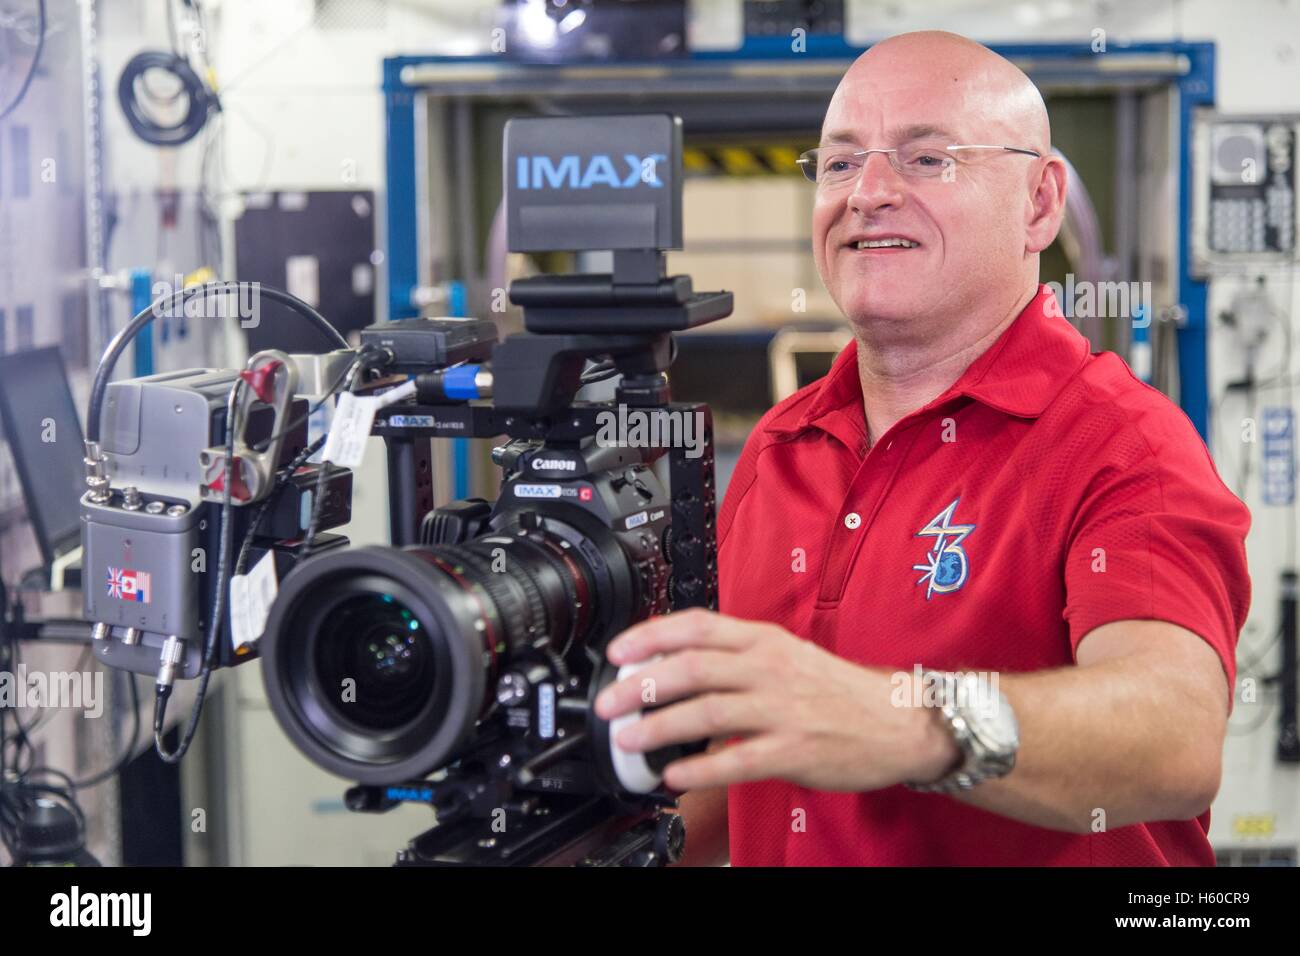 NASA astronaut Scott Kelly undergoes IMAX cinematography training in an International Space Station mock-up at the Johnson Space Center Space August 5, 2014 in Houston, Texas. Kelly will assist IMAX Entertainment and Walt Disney Studios documentary filmmakers by using IMAX cameras to film scenes in space throughout his year-long expedition on the International Space Station that can be used in the new 3D IMAX documentary A Beautiful Planet. Stock Photo